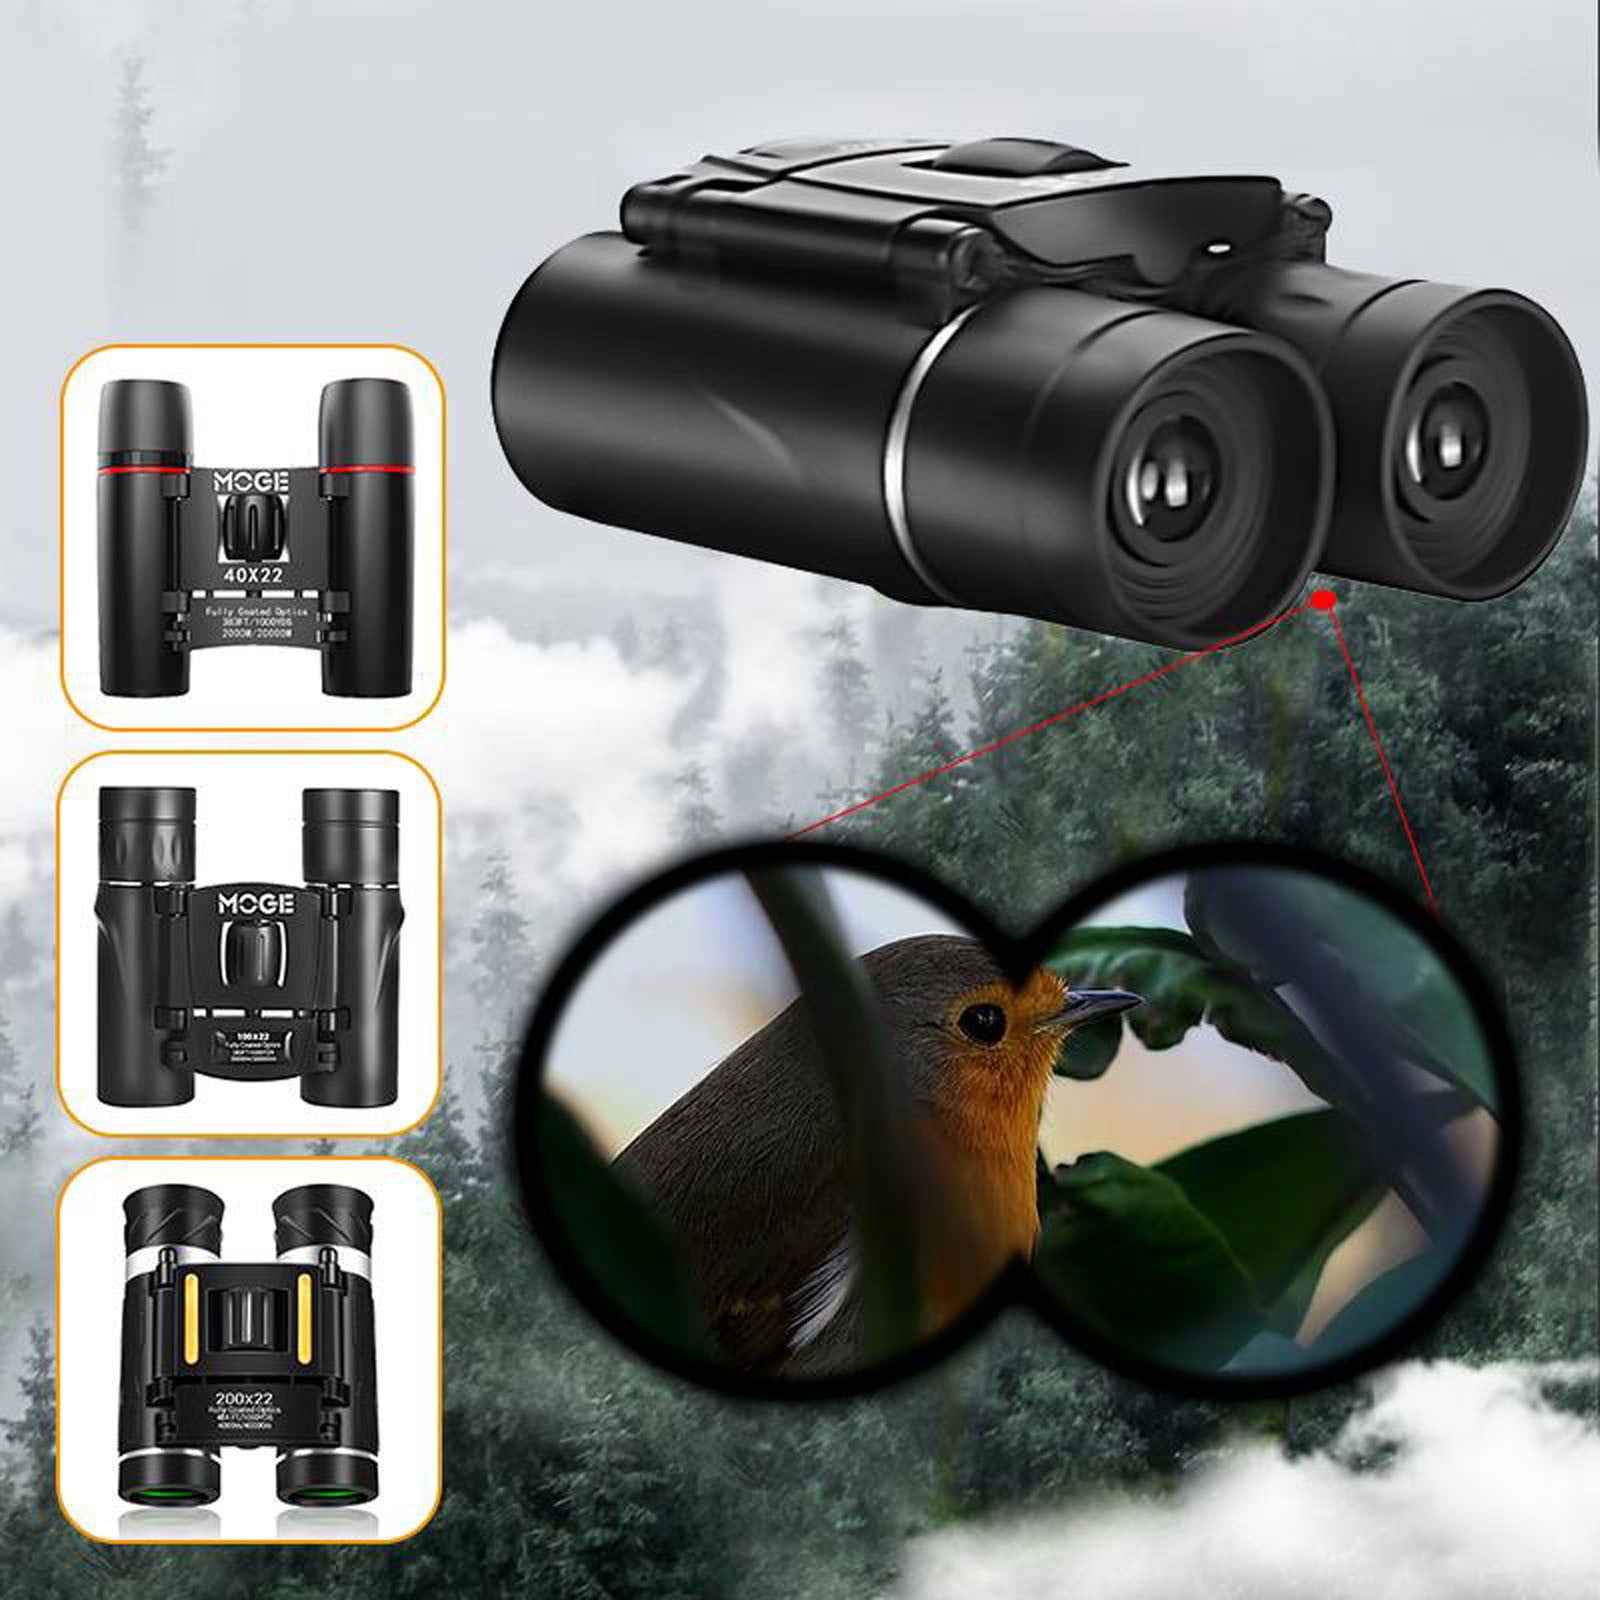 Tuscom Astronomy Telescope for Adults Day/Night Vision 40x60 Zoom High Power BAK4 Monocular Telescope Waterproof Outdoor Supplies Accessories Christmas Thanksgiving Gifts